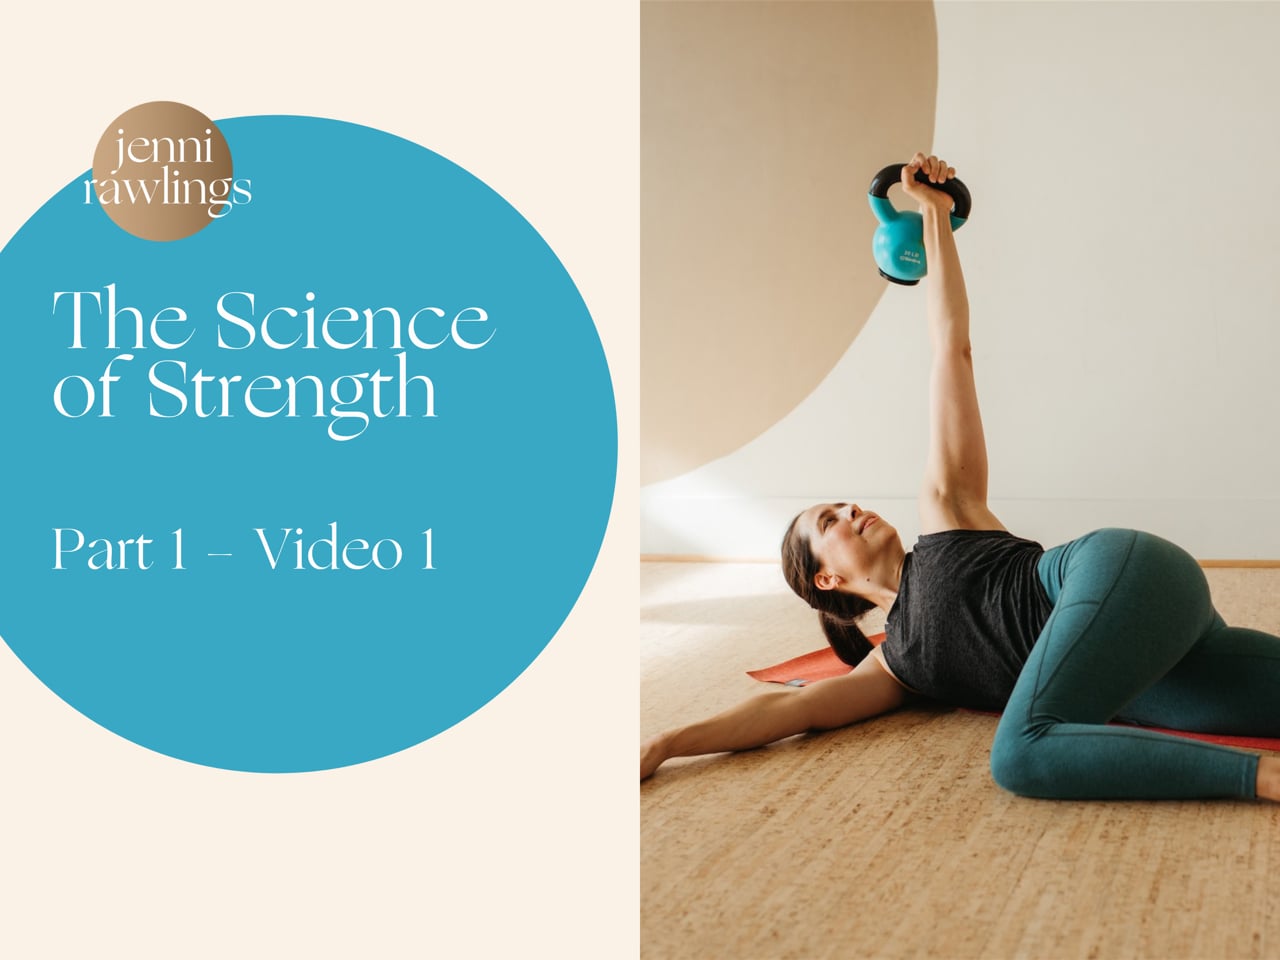 The Science of Strength Part 1, Video 1